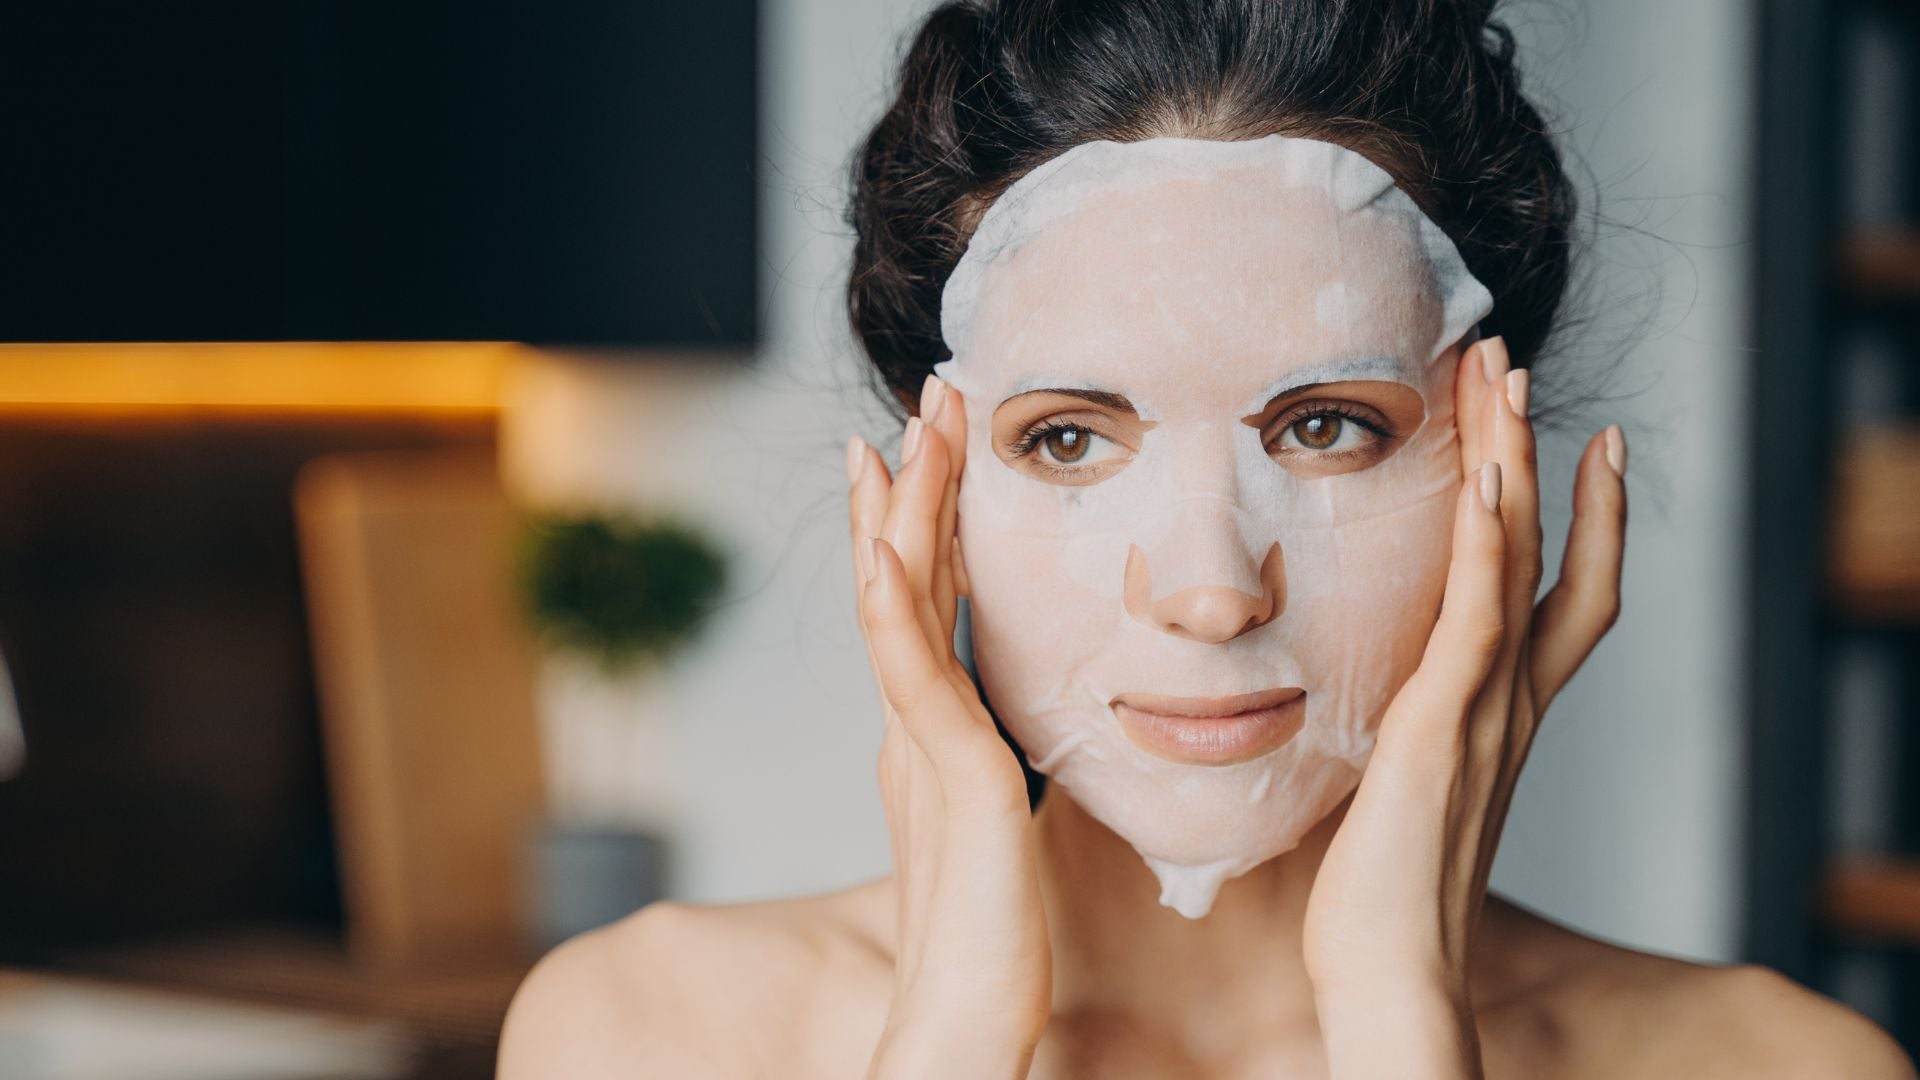 sheet mask hydrate and nourish your skin to brighten and clarify